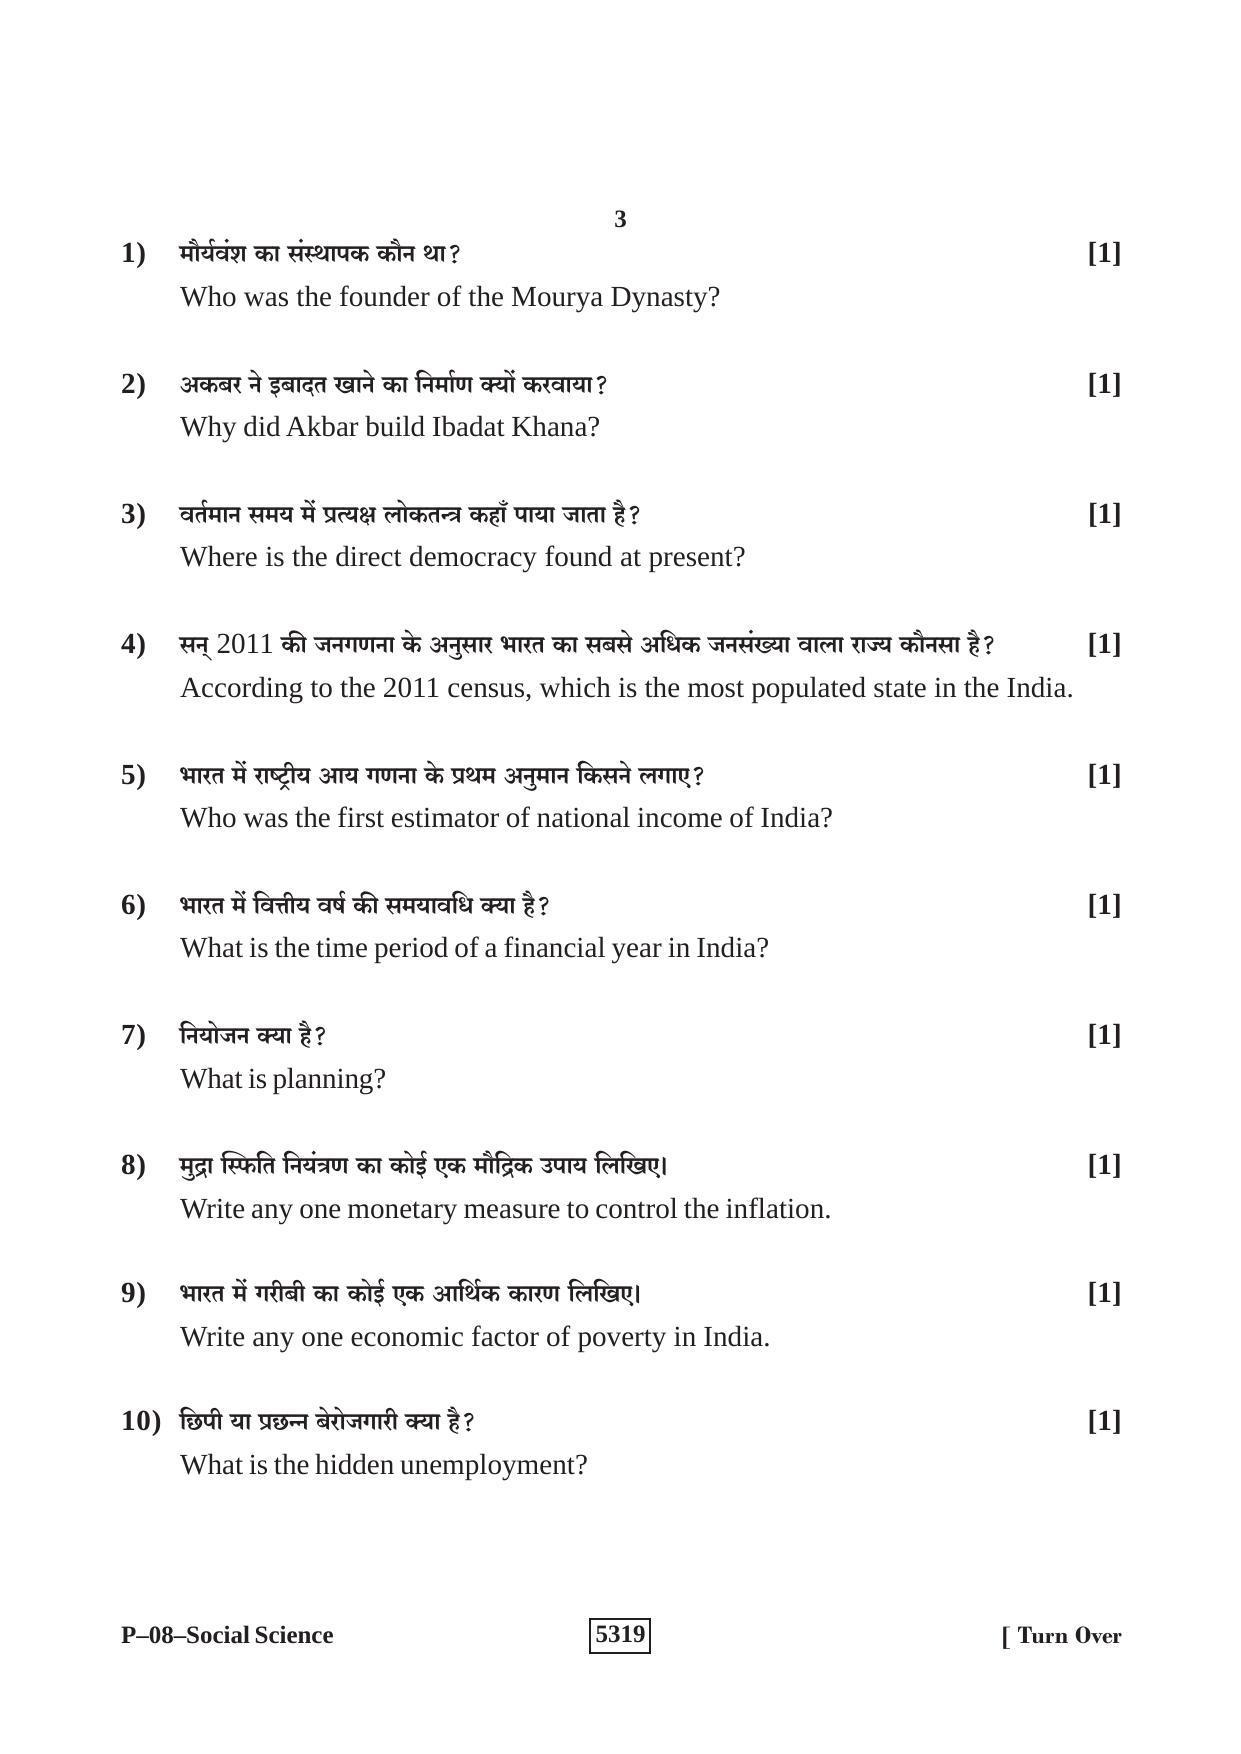 RBSE 2020 Social Science Praveshika Question Paper - Page 3